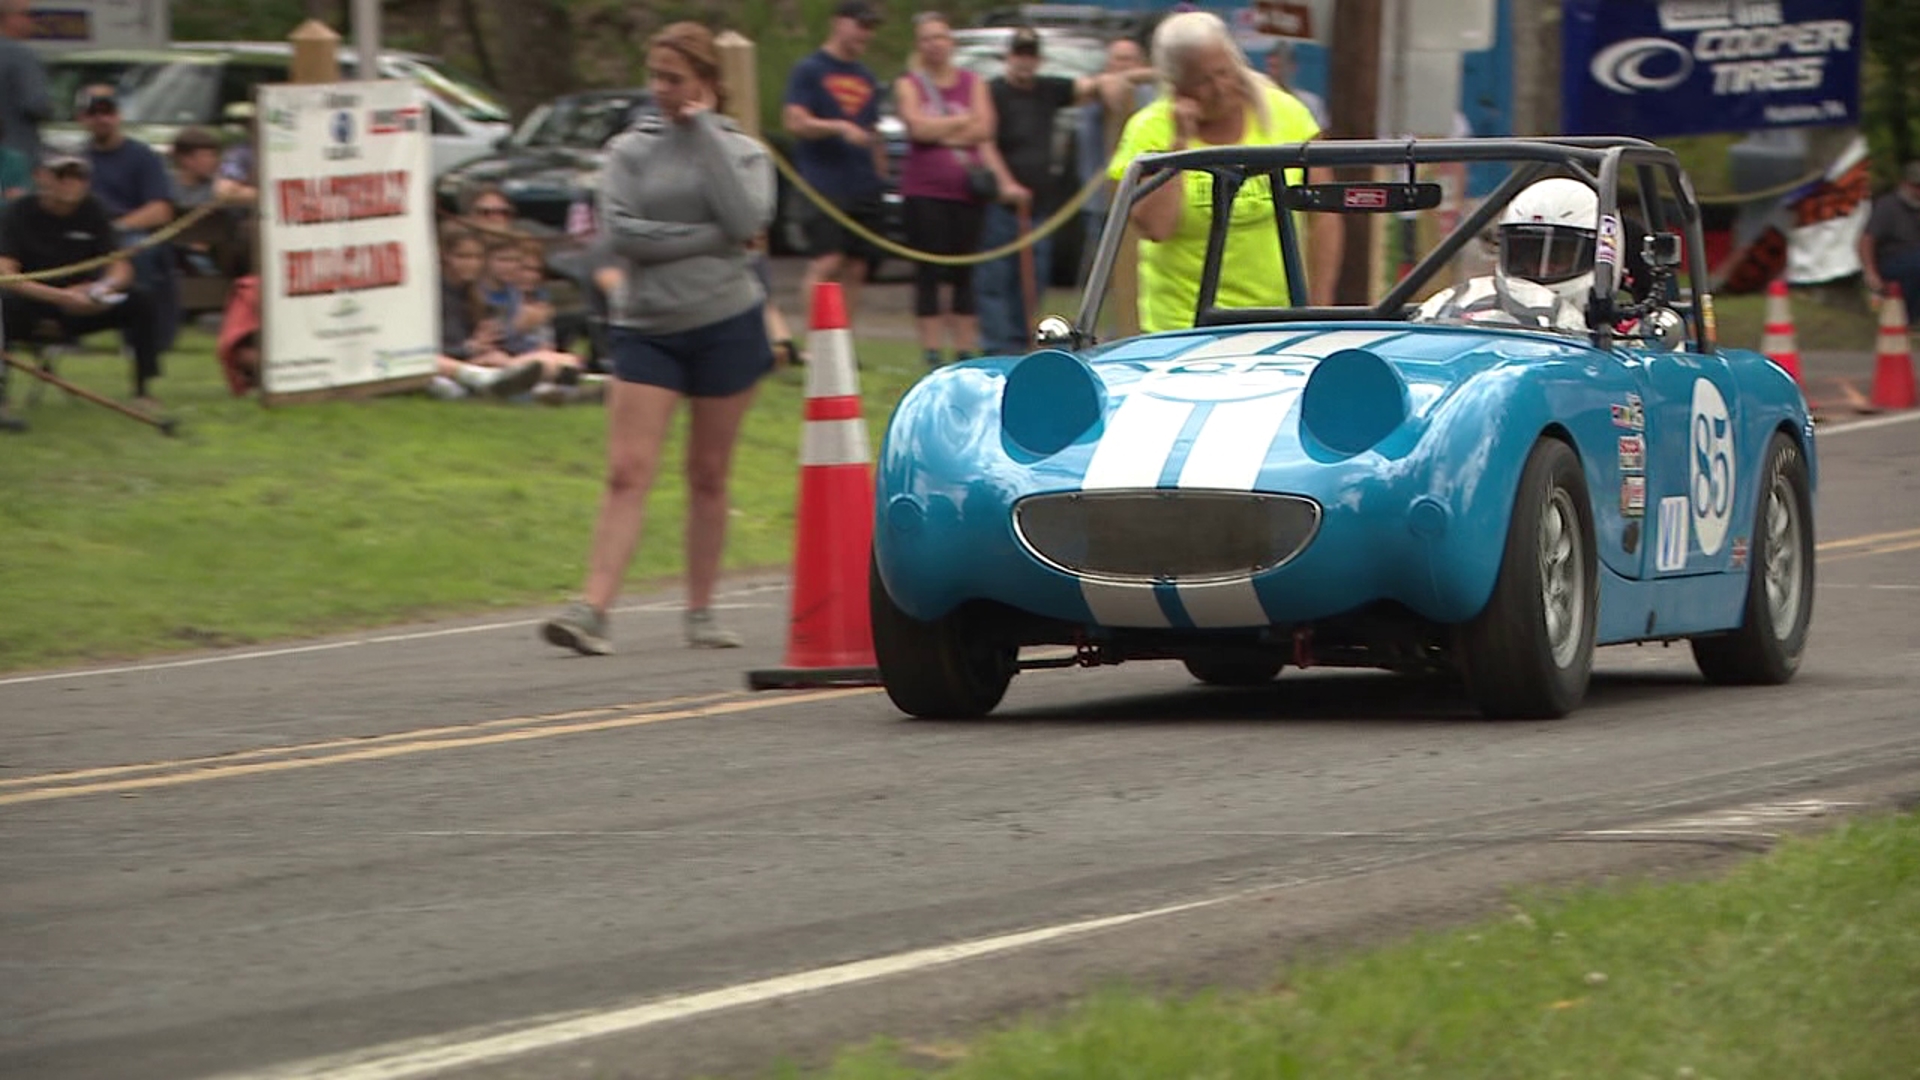 All sorts of vehicles raced up a one-mile, six-turn course on Hill Street on Saturday as part of the Weatherly Hillclimb.